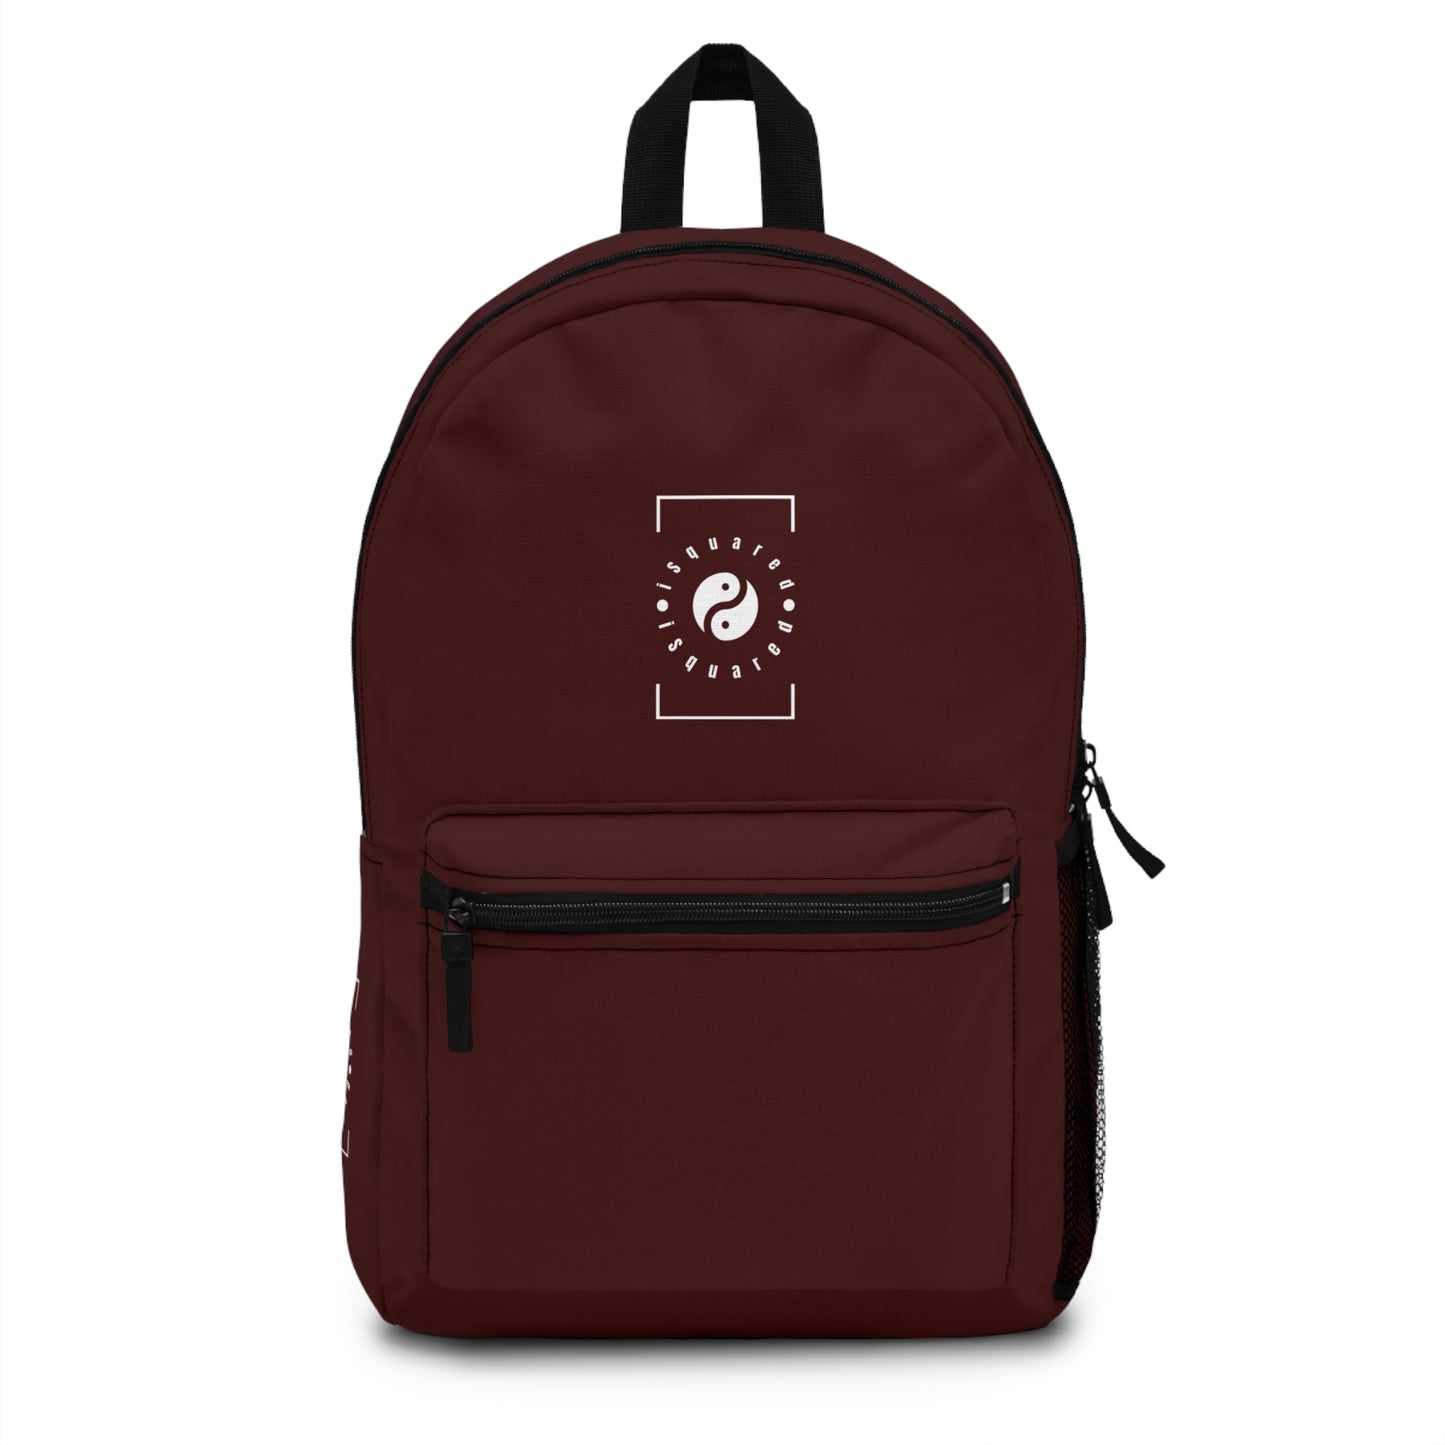 Lipstick Red - Backpack